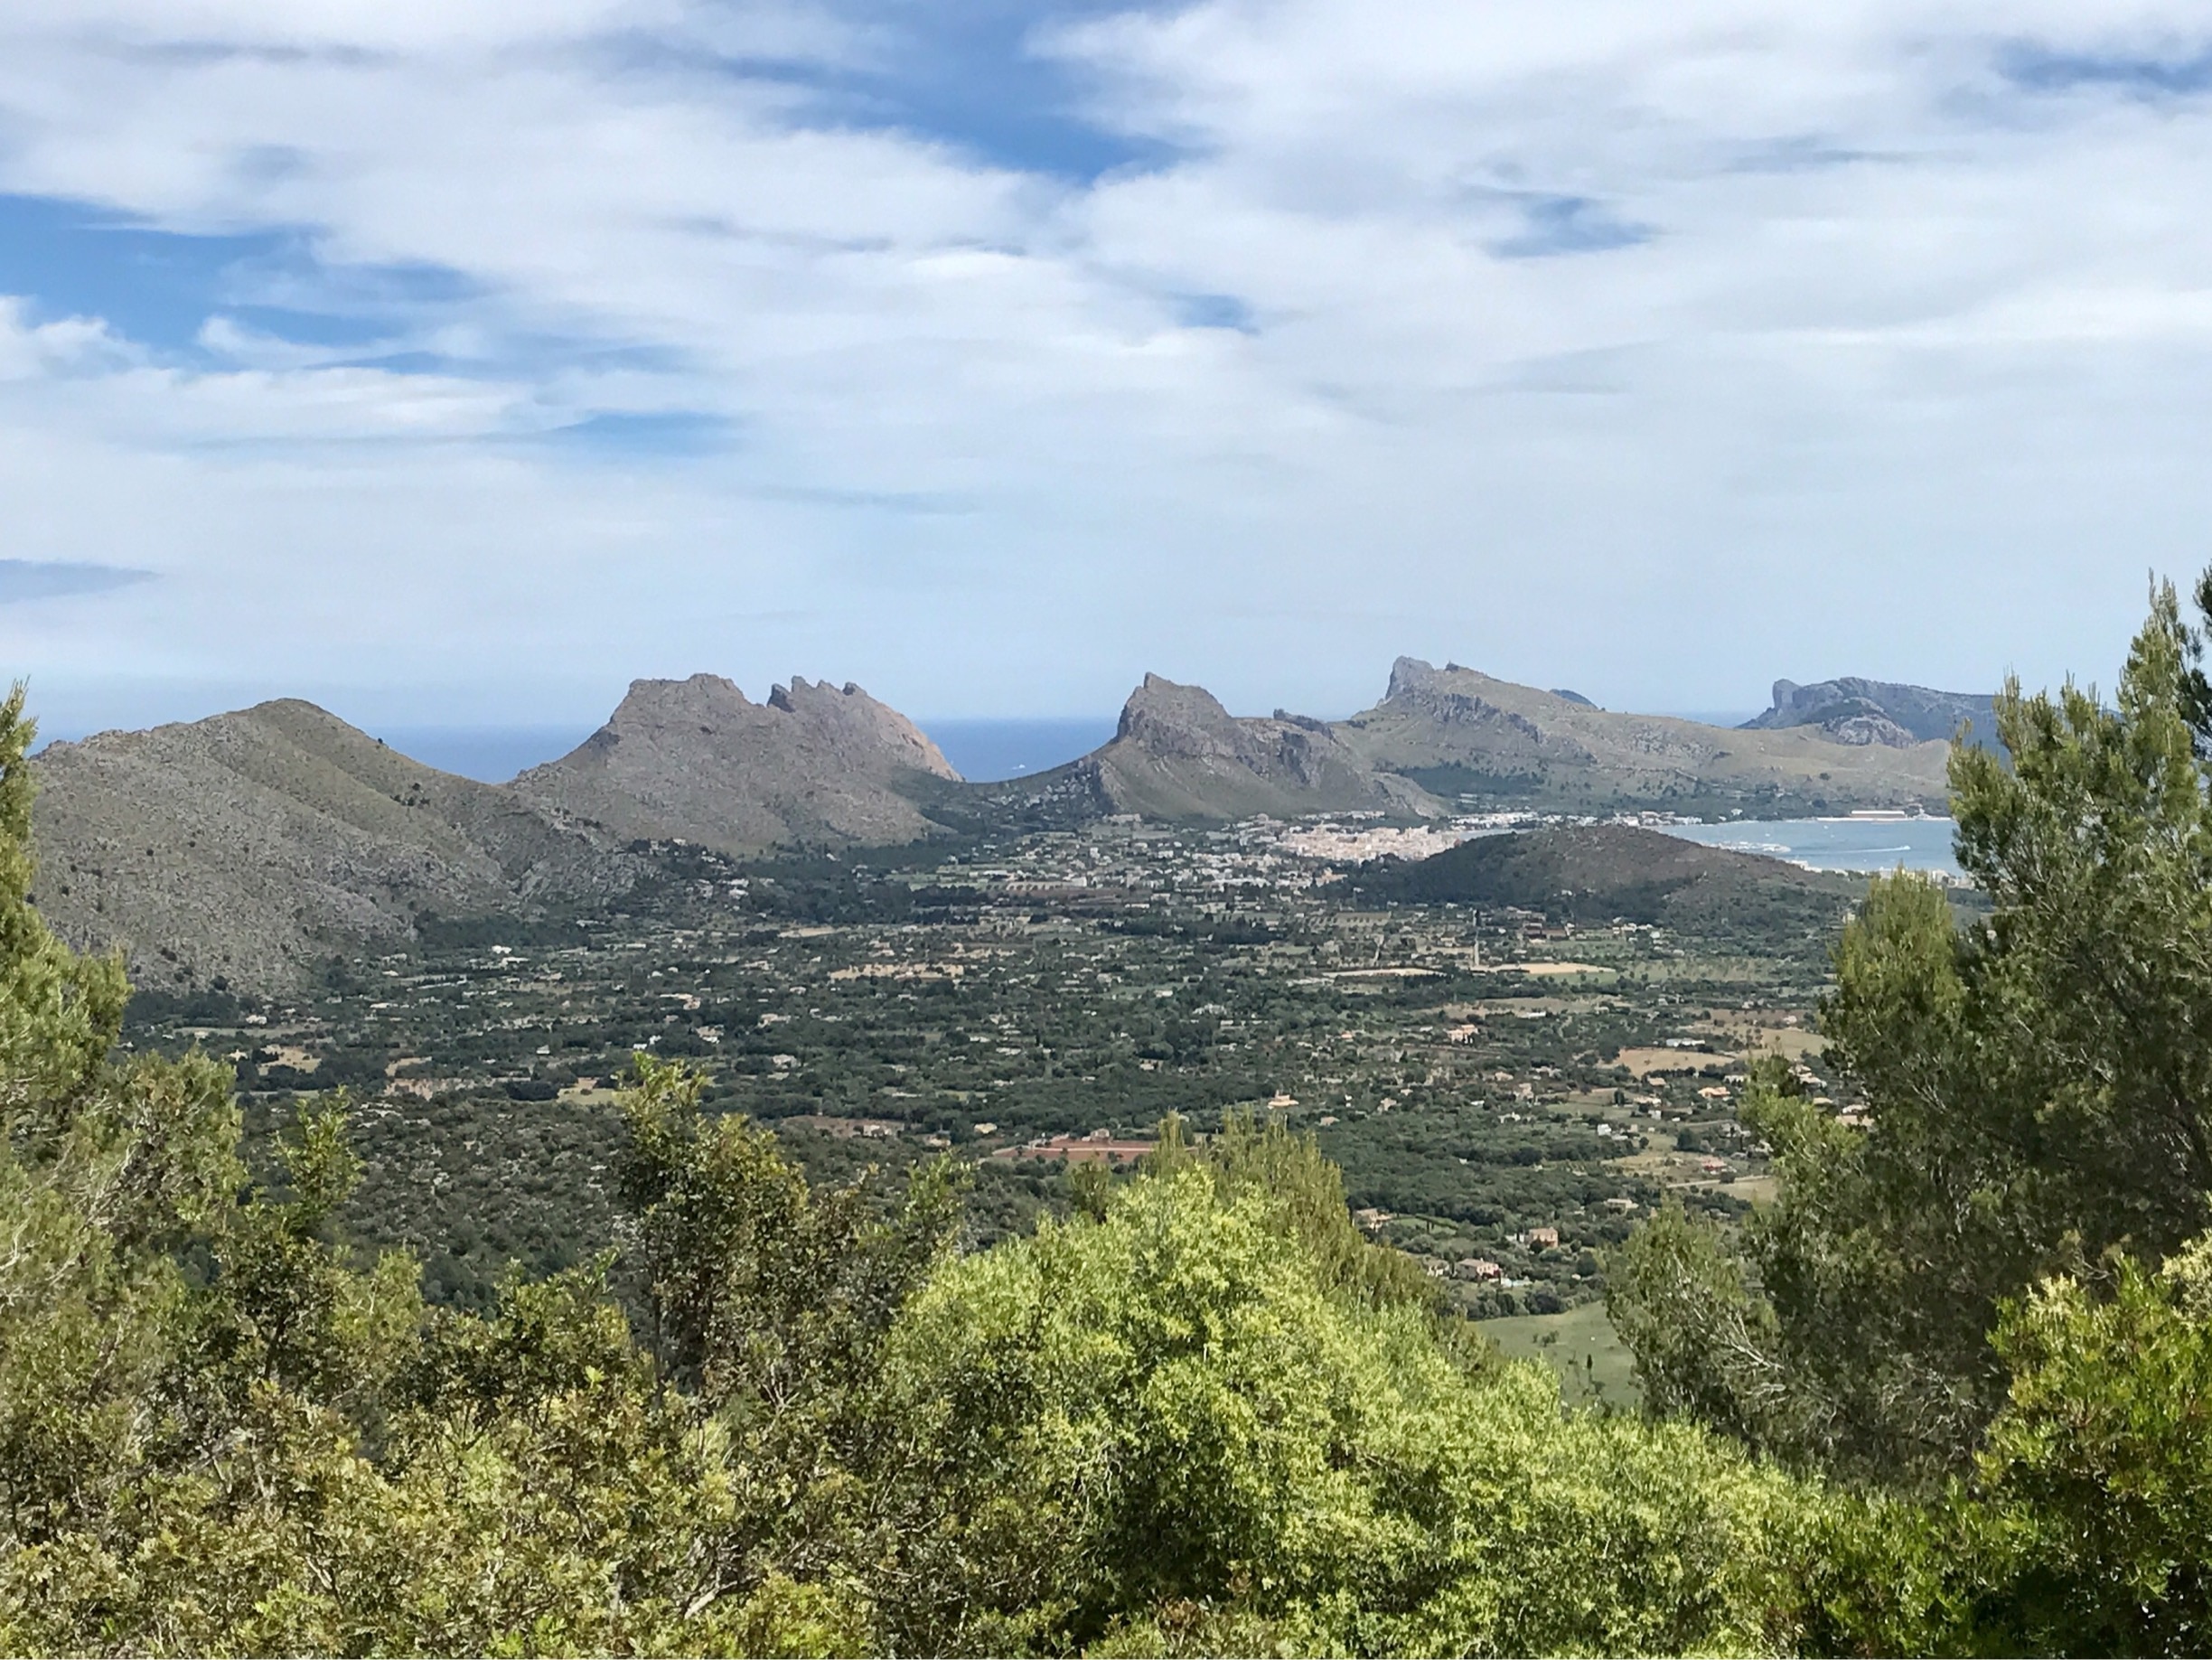 A beautiful fairly gentle climb to the top of Puig St Marie adjacent to Pollensa Old Town offers the most stunning reward of views over towards Puerto Pollensa and the Cap de Formentor! Sensible shoes recommended though as there are cobbles and stone paths. 